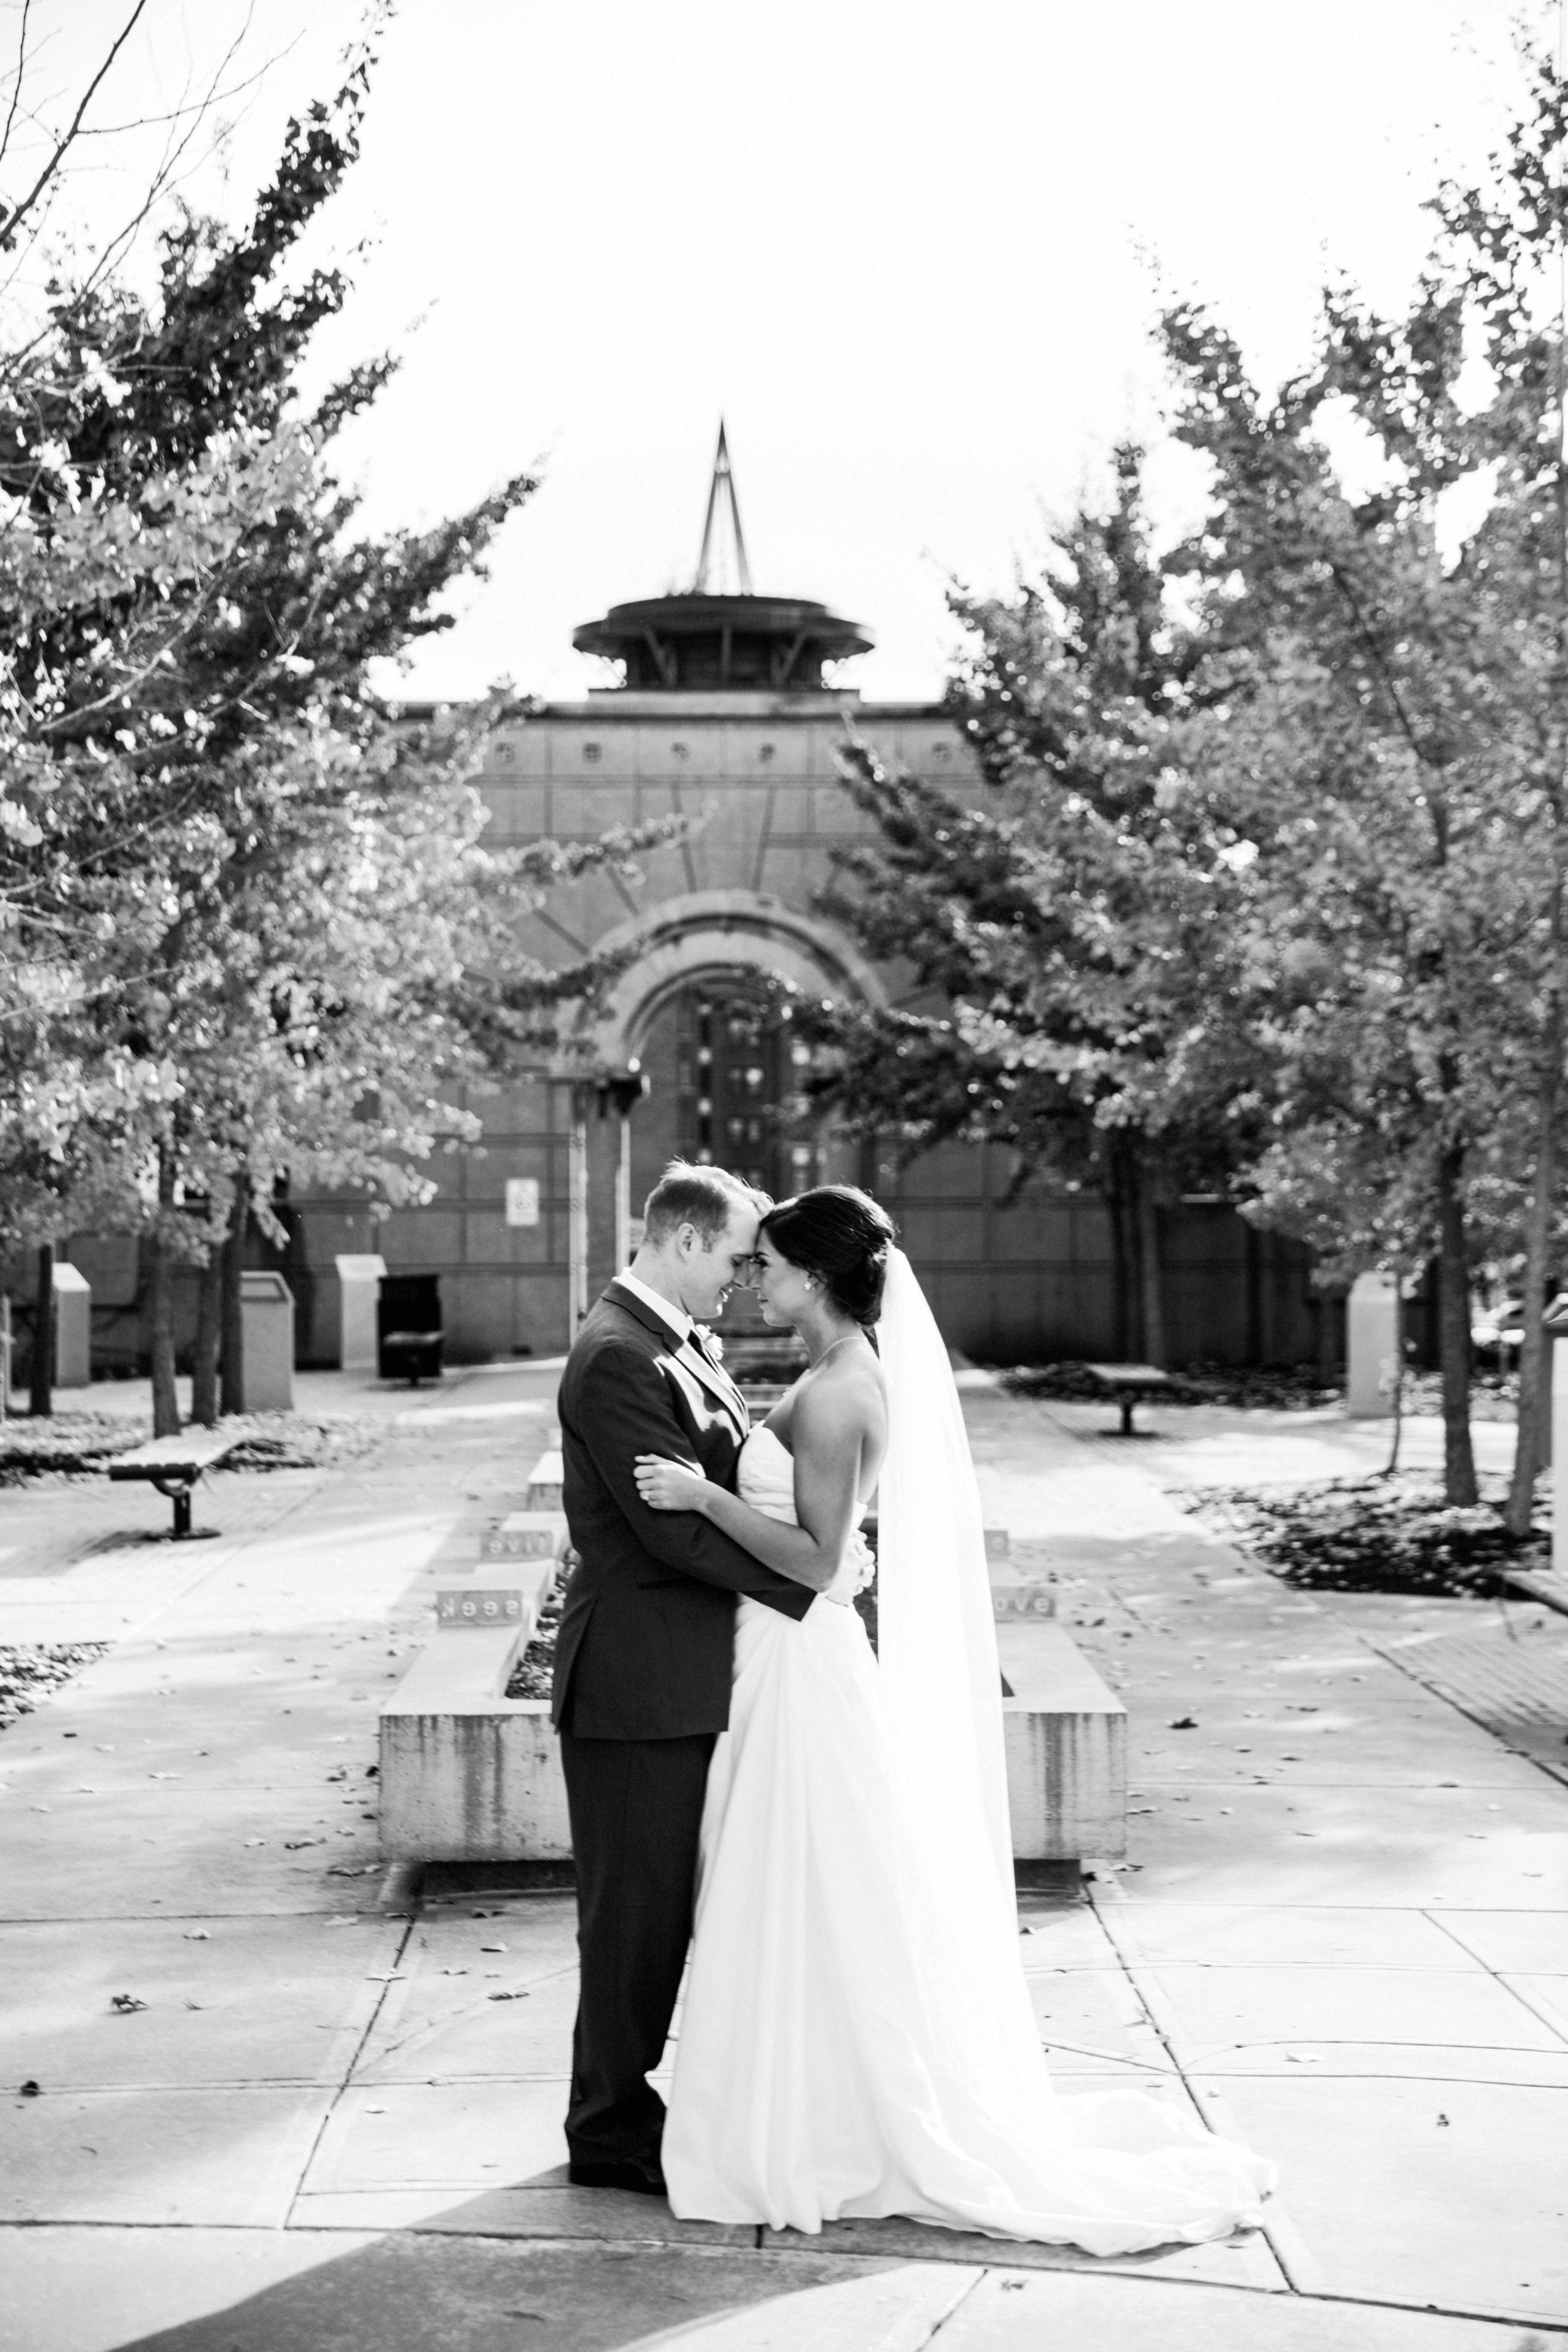 black and white | wedding | wedding photos | wedding photography | images by feliciathephotographer.com | Country Club Plaza | Kansas City | Unity Temple | Cancer Survivor Park | bride and groom portraits | candid | laughing bride | David's Bridal | forehead touches 